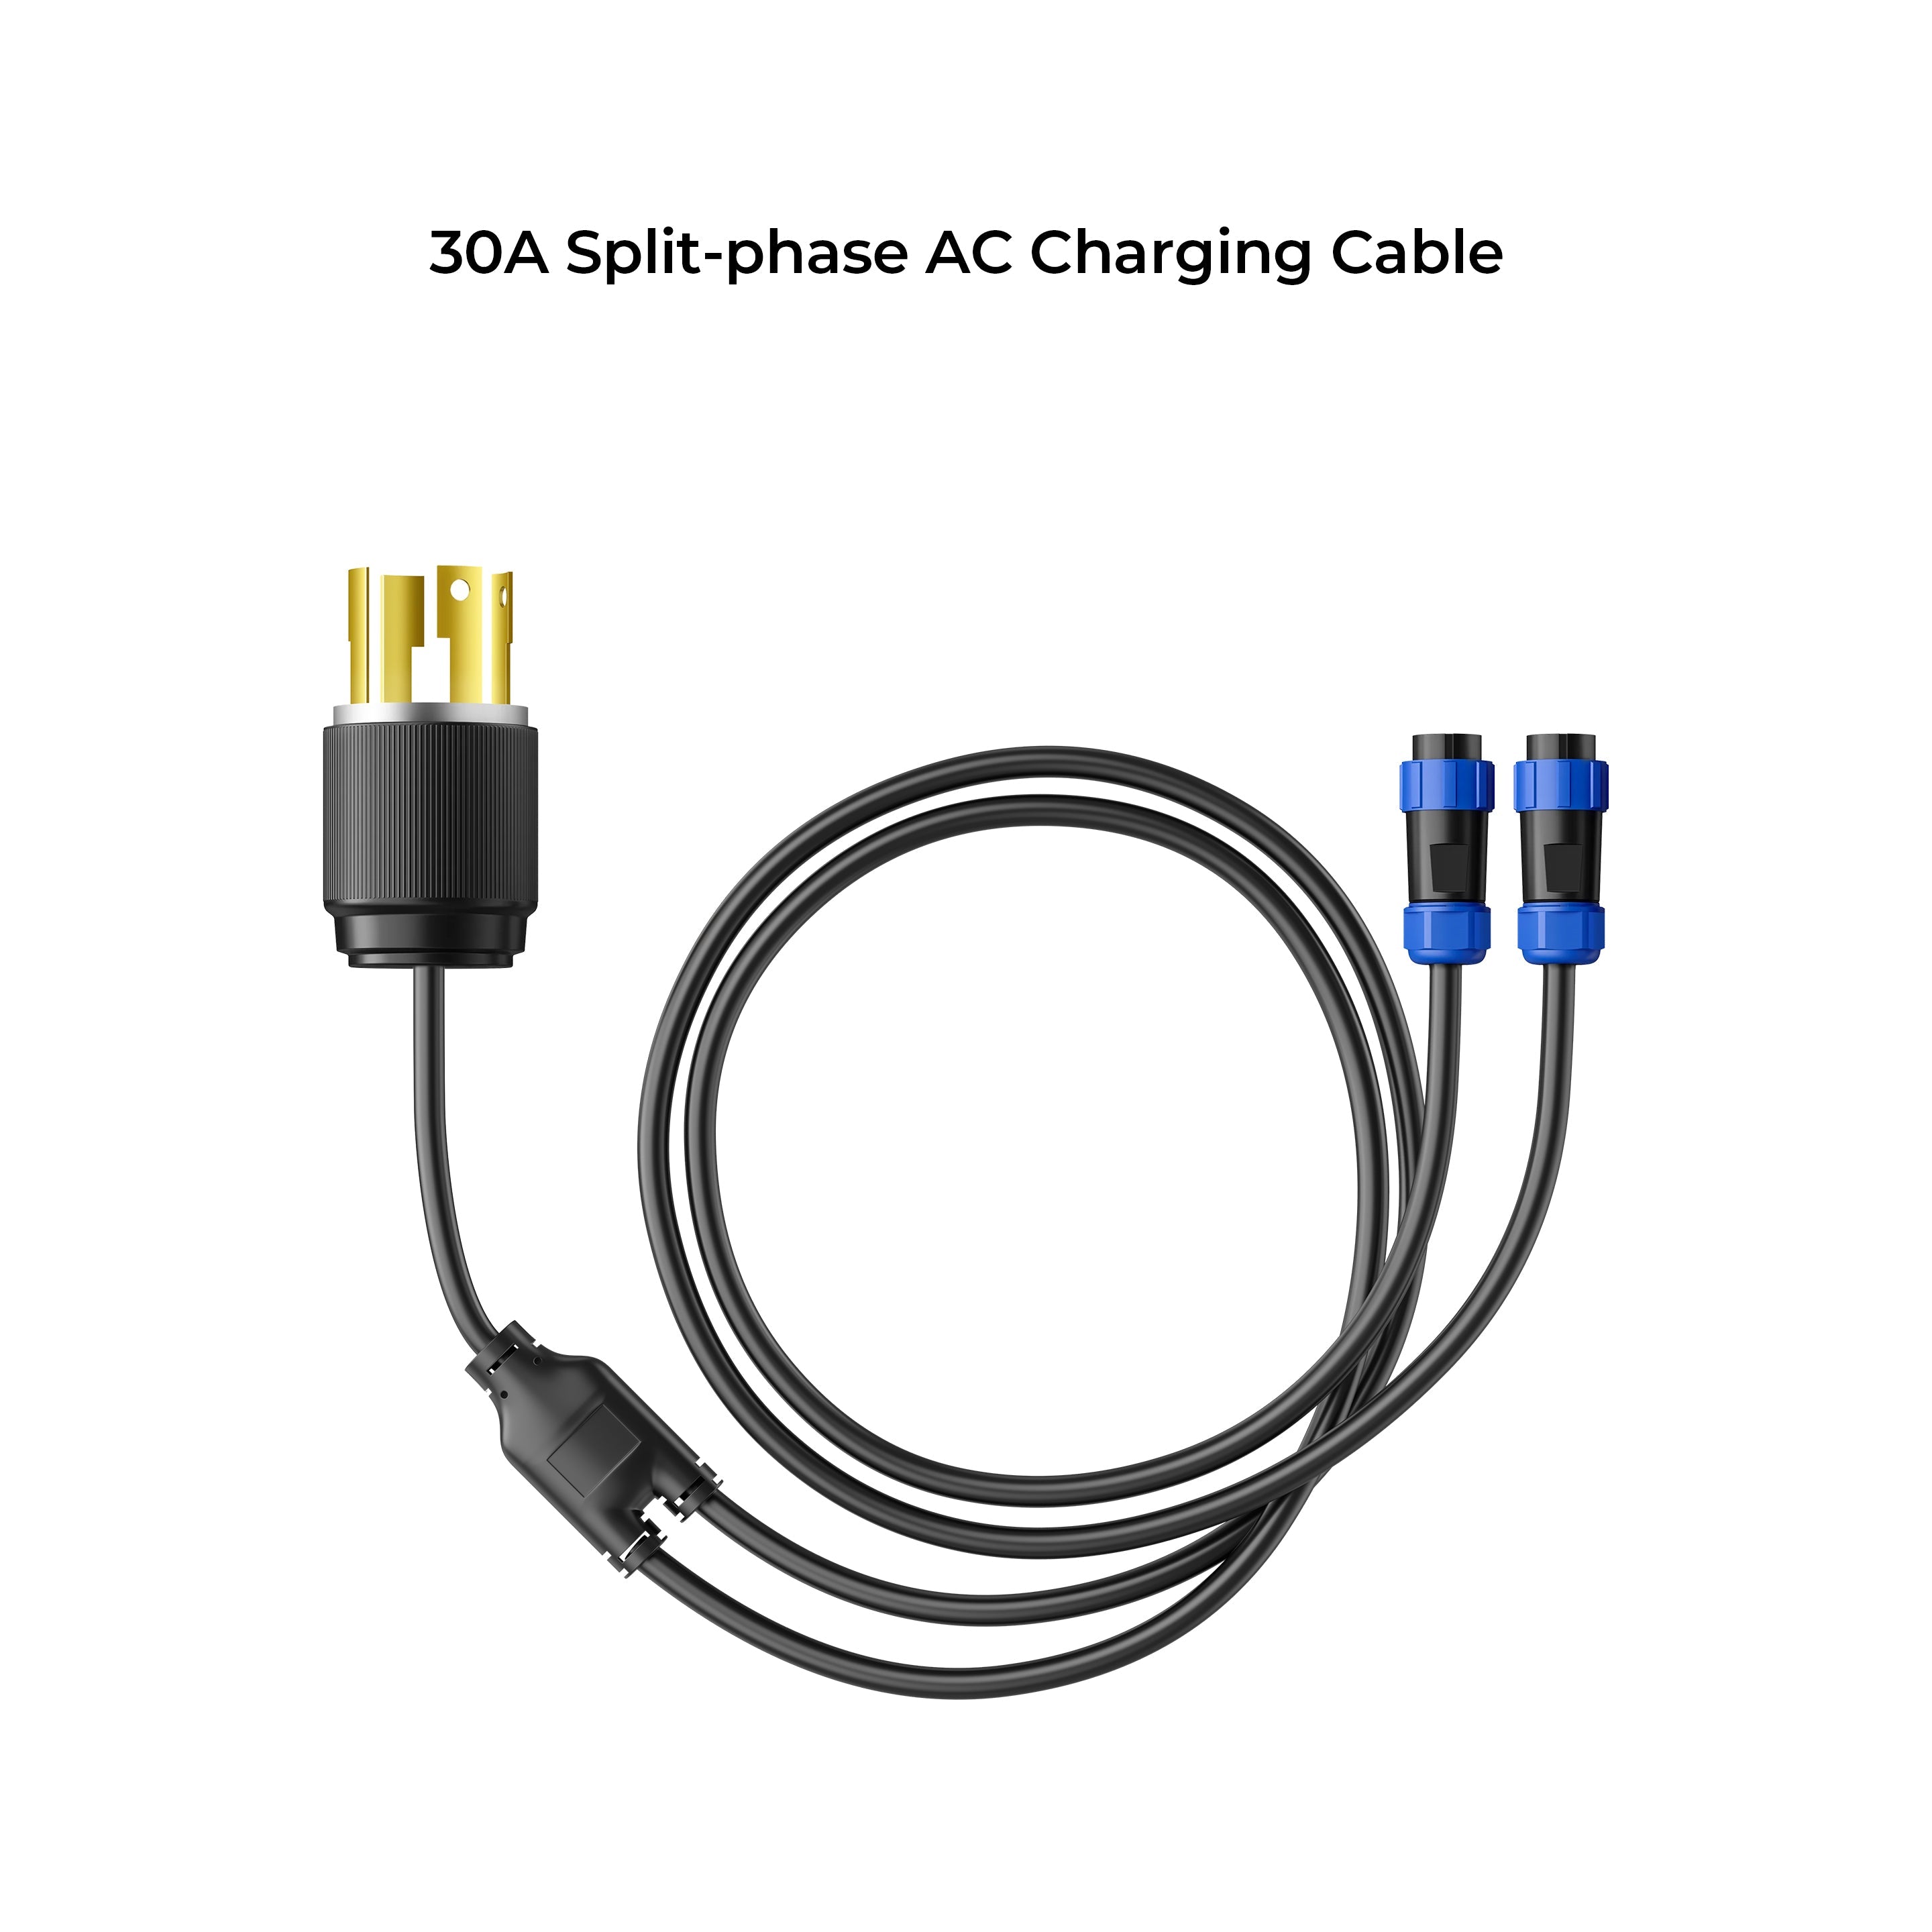 BLUETTI 30A AC Charging Cable For Split-Phase Function